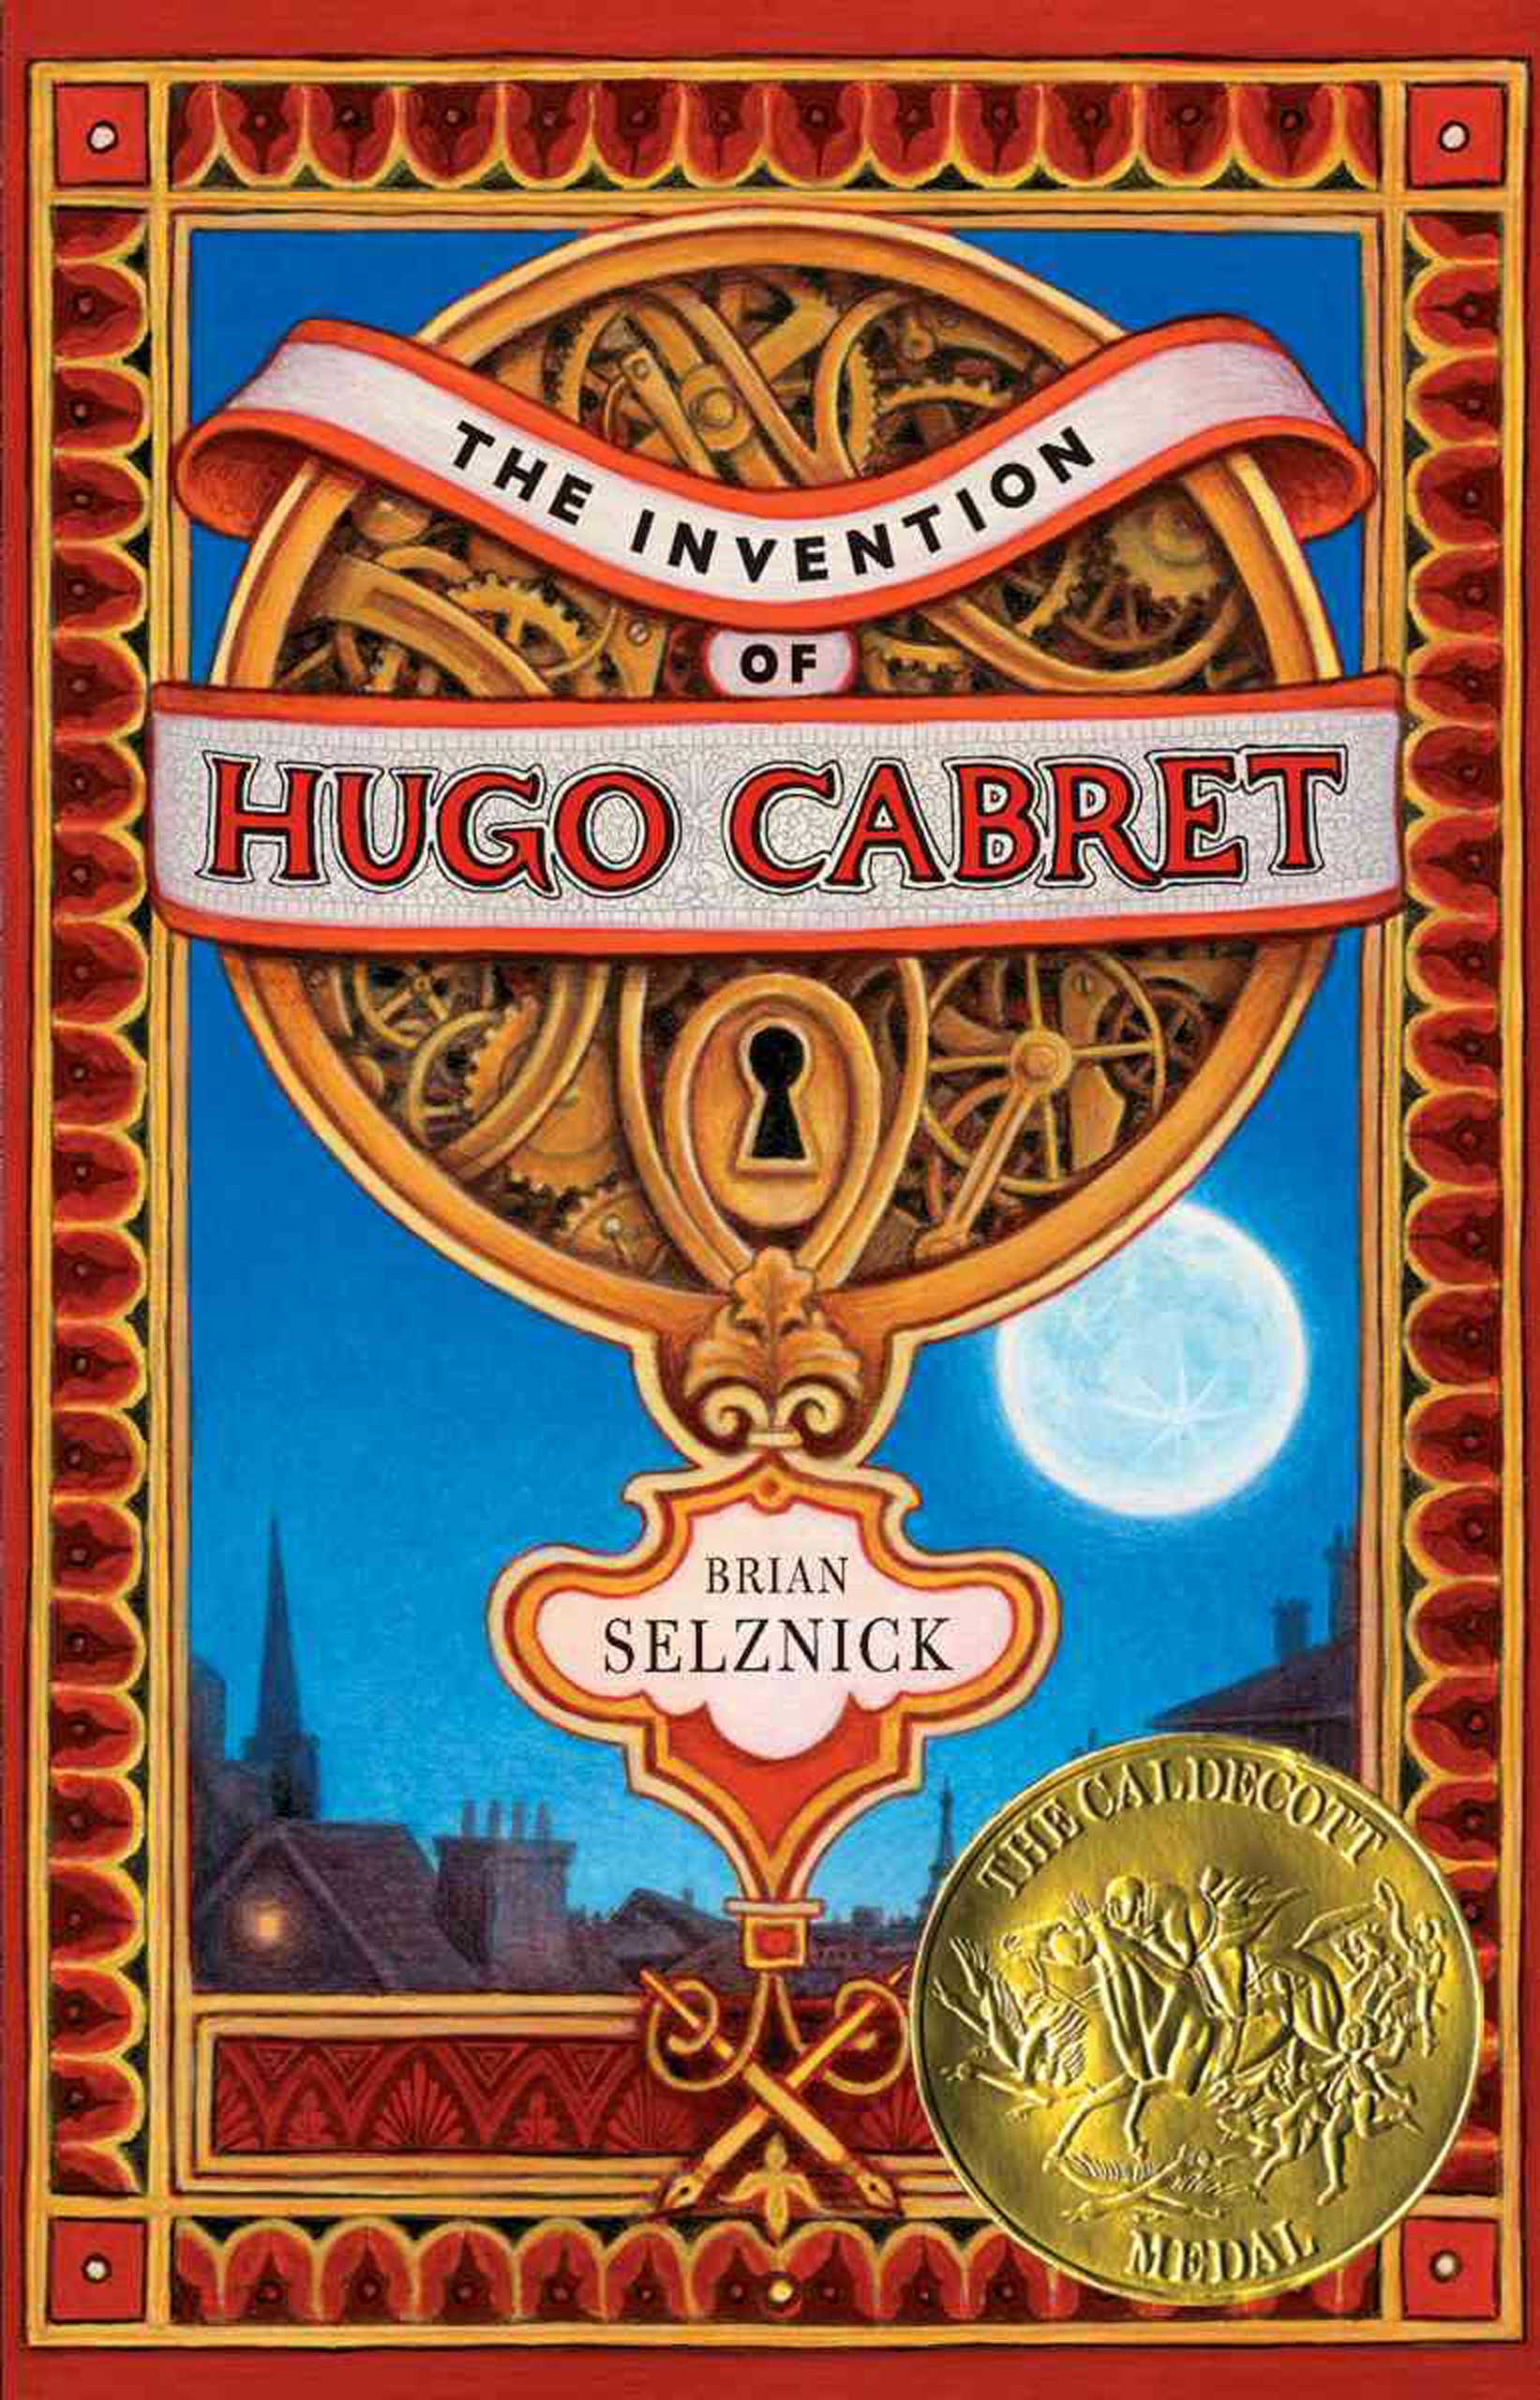 The Invention of Hugo Cabret, by Brian Selznick.
                              
                              
                              
                              A boy who lives in a Parisian train station investigates a hidden message from his late father in a story that was the basis for the Martin Scorsese 2011 film Hugo.
                              
                              
                              
                              Buy now: The Invention of Hugo Cabret